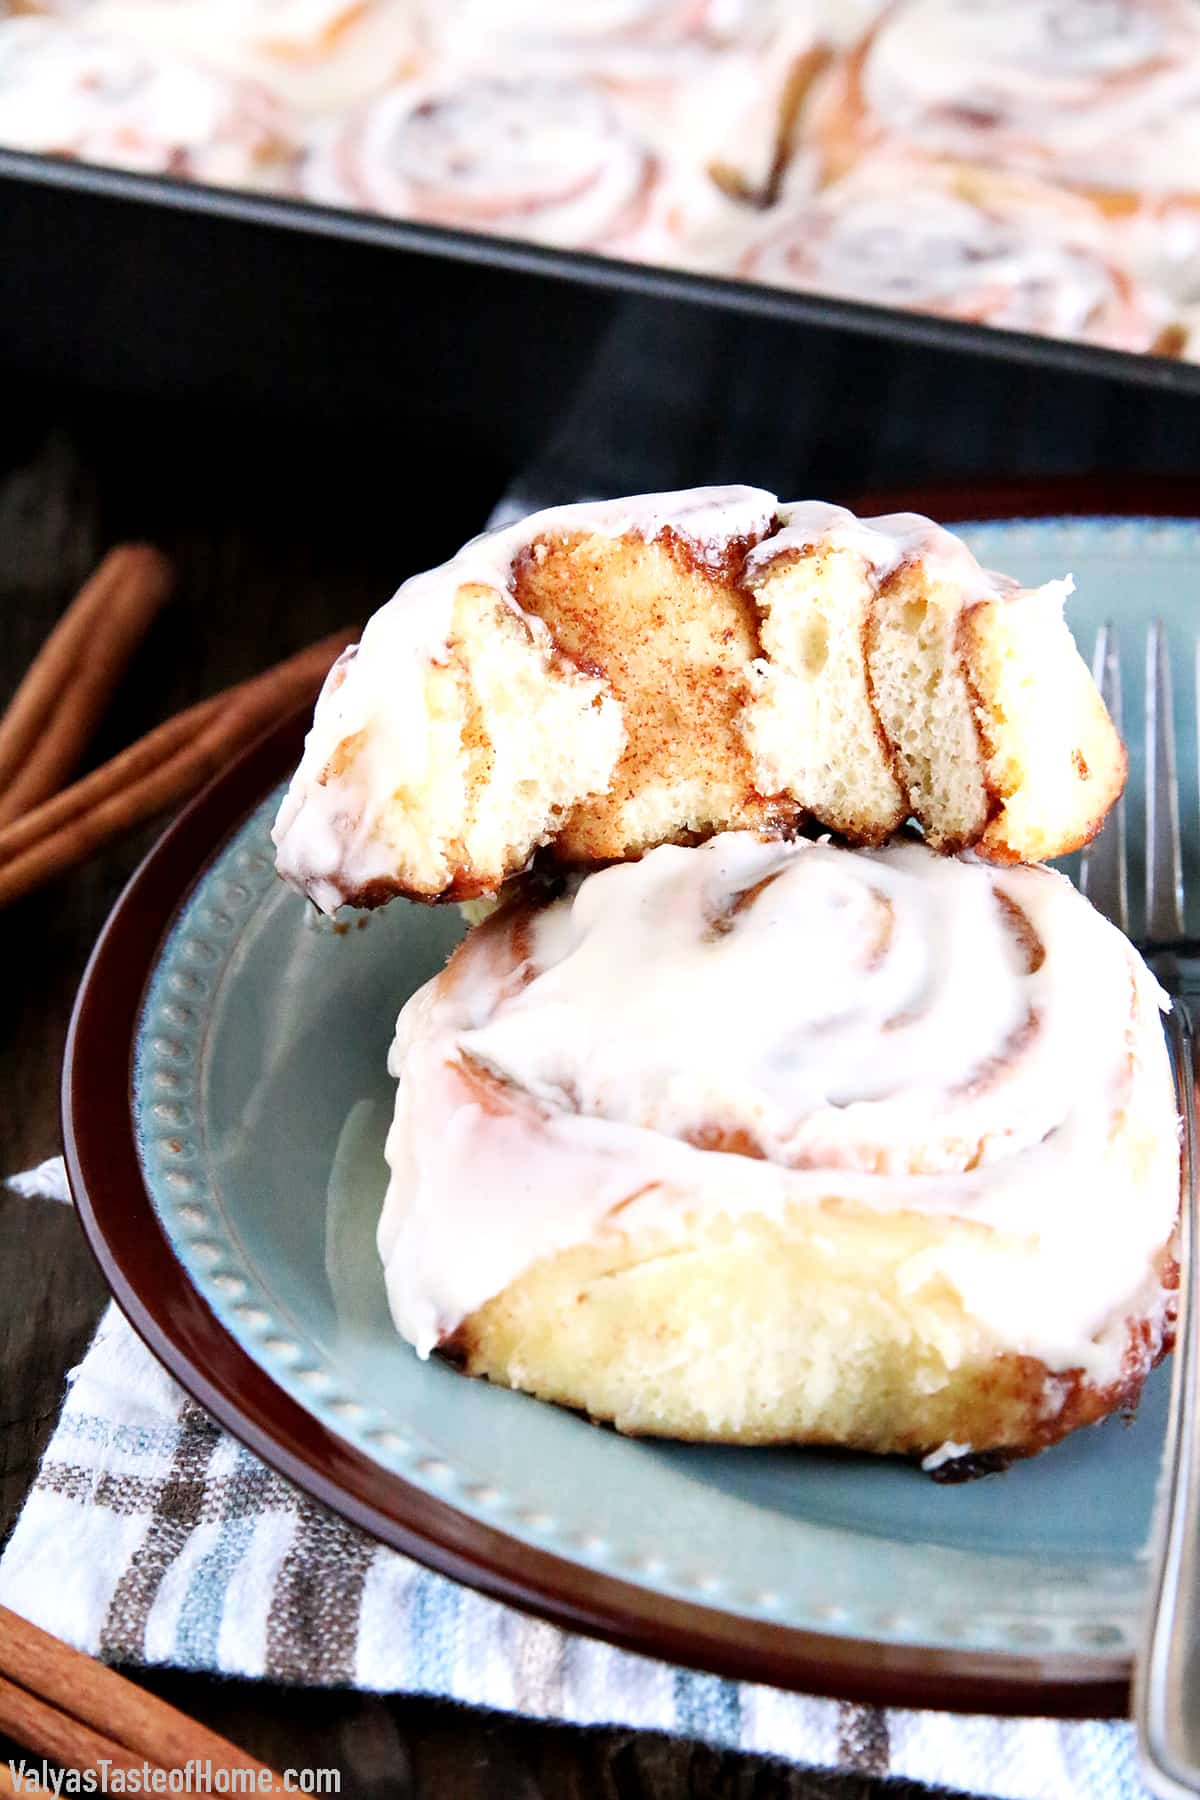 These Super Soft Cinnamon Rolls are incredibly fluffy, moist, and absolutely irresistible. We've been making them for many years now and it's proven to be a no-fail go-to recipe that is loved by everyone. Hands down the best cinnamon roll recipe out there!  